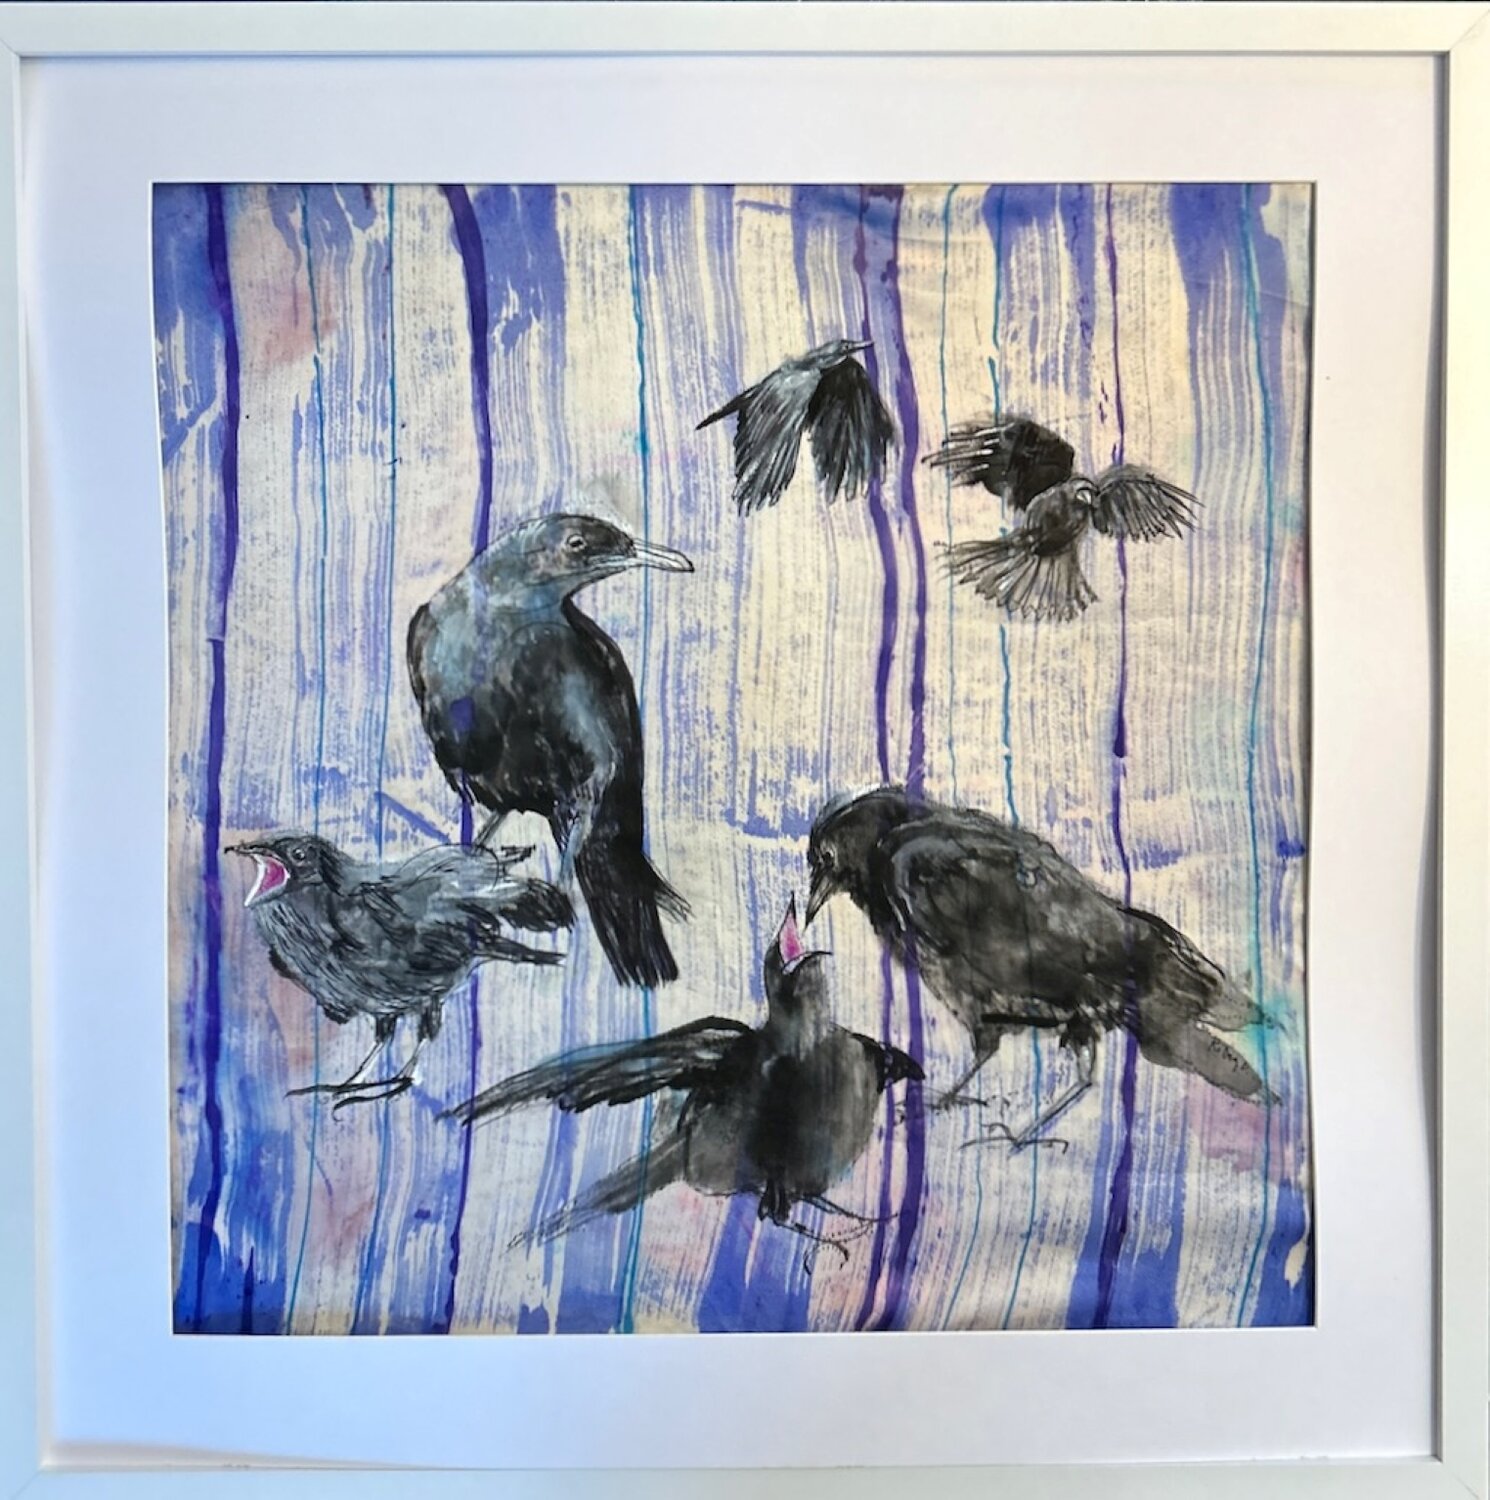 Deyo said that one of her favorite pieces on display at the library is ‘Crows Get Messages From Rain.’